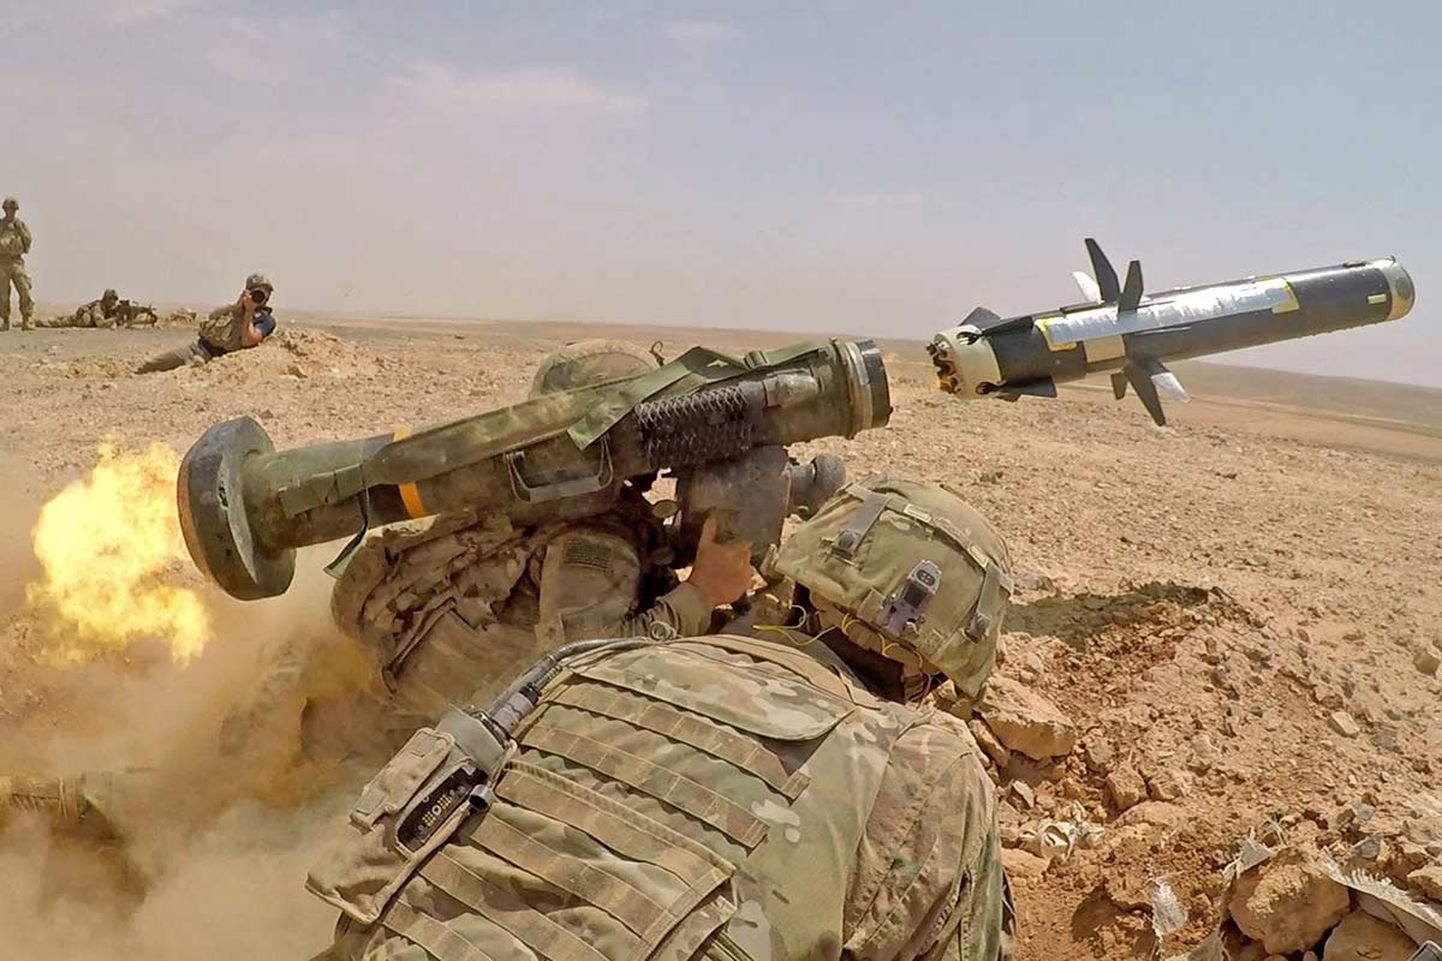 PICTURE SHOWS: Infantry Soldiers fire an FGM-148 Javelin during a combined arms live-fire exercise in Jordan, Aug. 27, 2019, in support of Eager Lion. Soldiers from 1st Battalion, 8th Infantry Regiment, 3rd Armored Brigade Combat Team, 4th Infantry Division participated in Eager Lion, U.S. Central Command's largest and most complex exercise. It is an opportunity to integrate forces in a multilateral environment, operate in realistic terrain and strengthen military-to-military relationships.

When: 20 Dec 2019
Credit: Cover Images/US Army

**THIS CREDIT *MUST* BE USED: Cover Images/US Army**